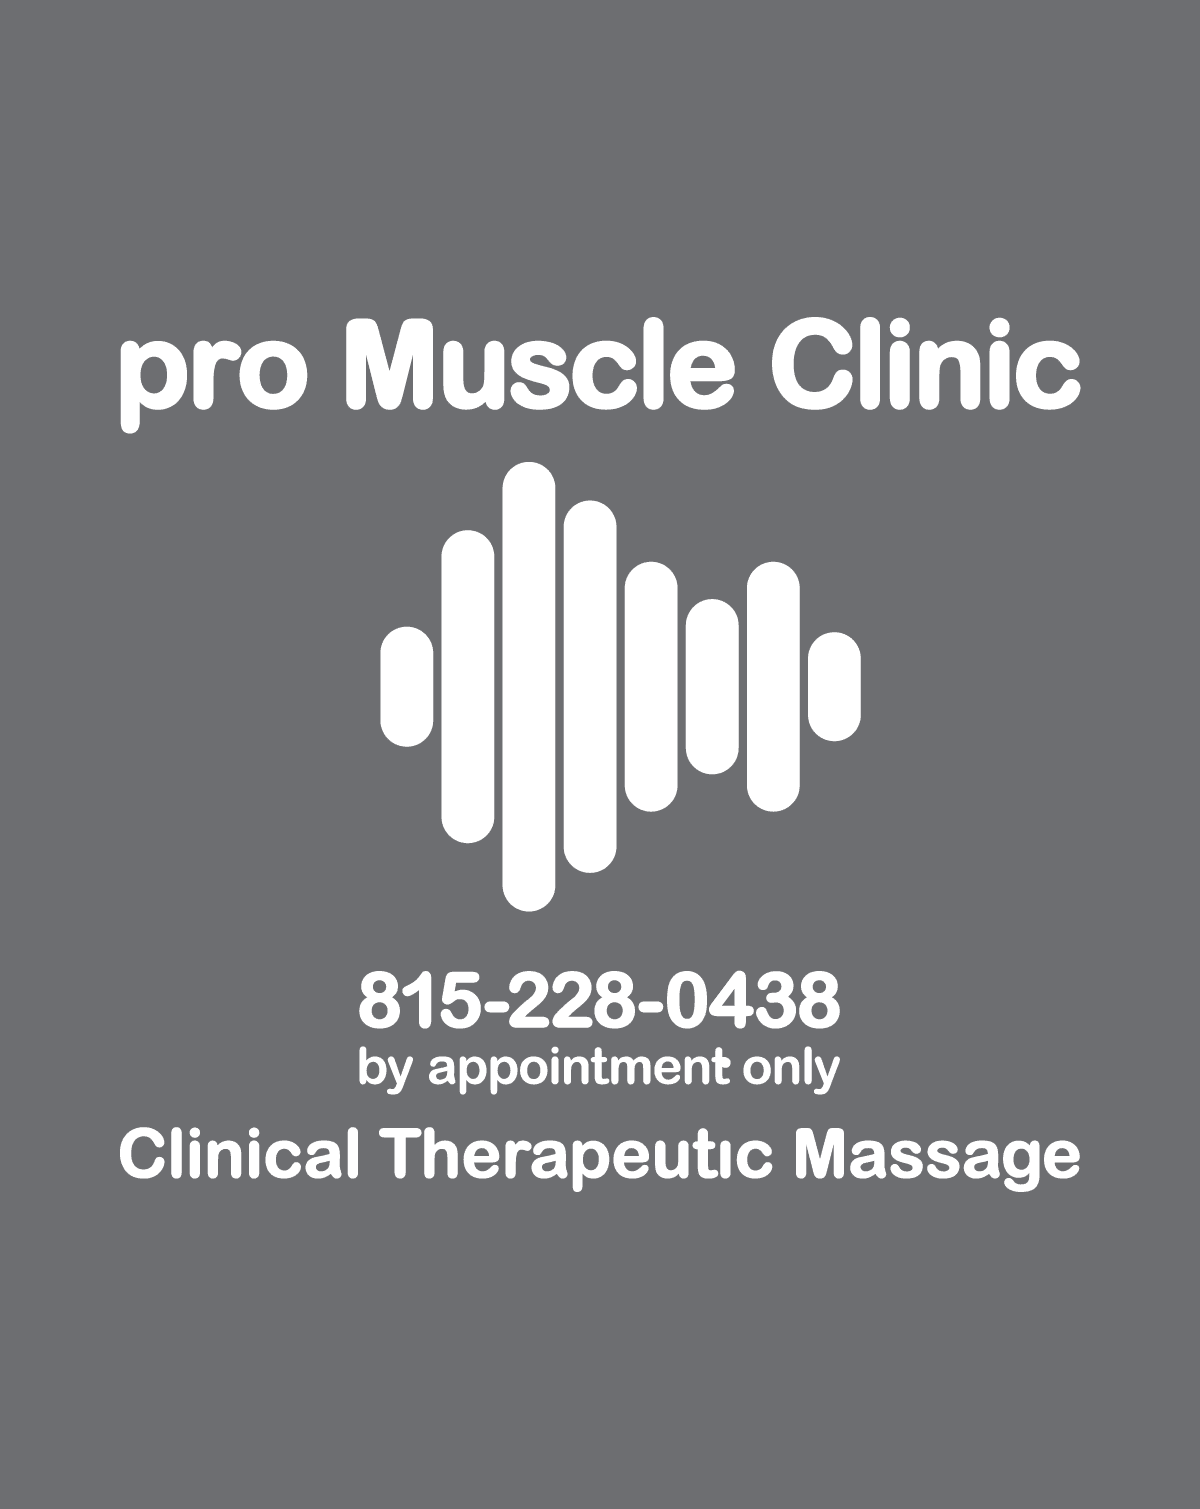 pro Muscle Clinic